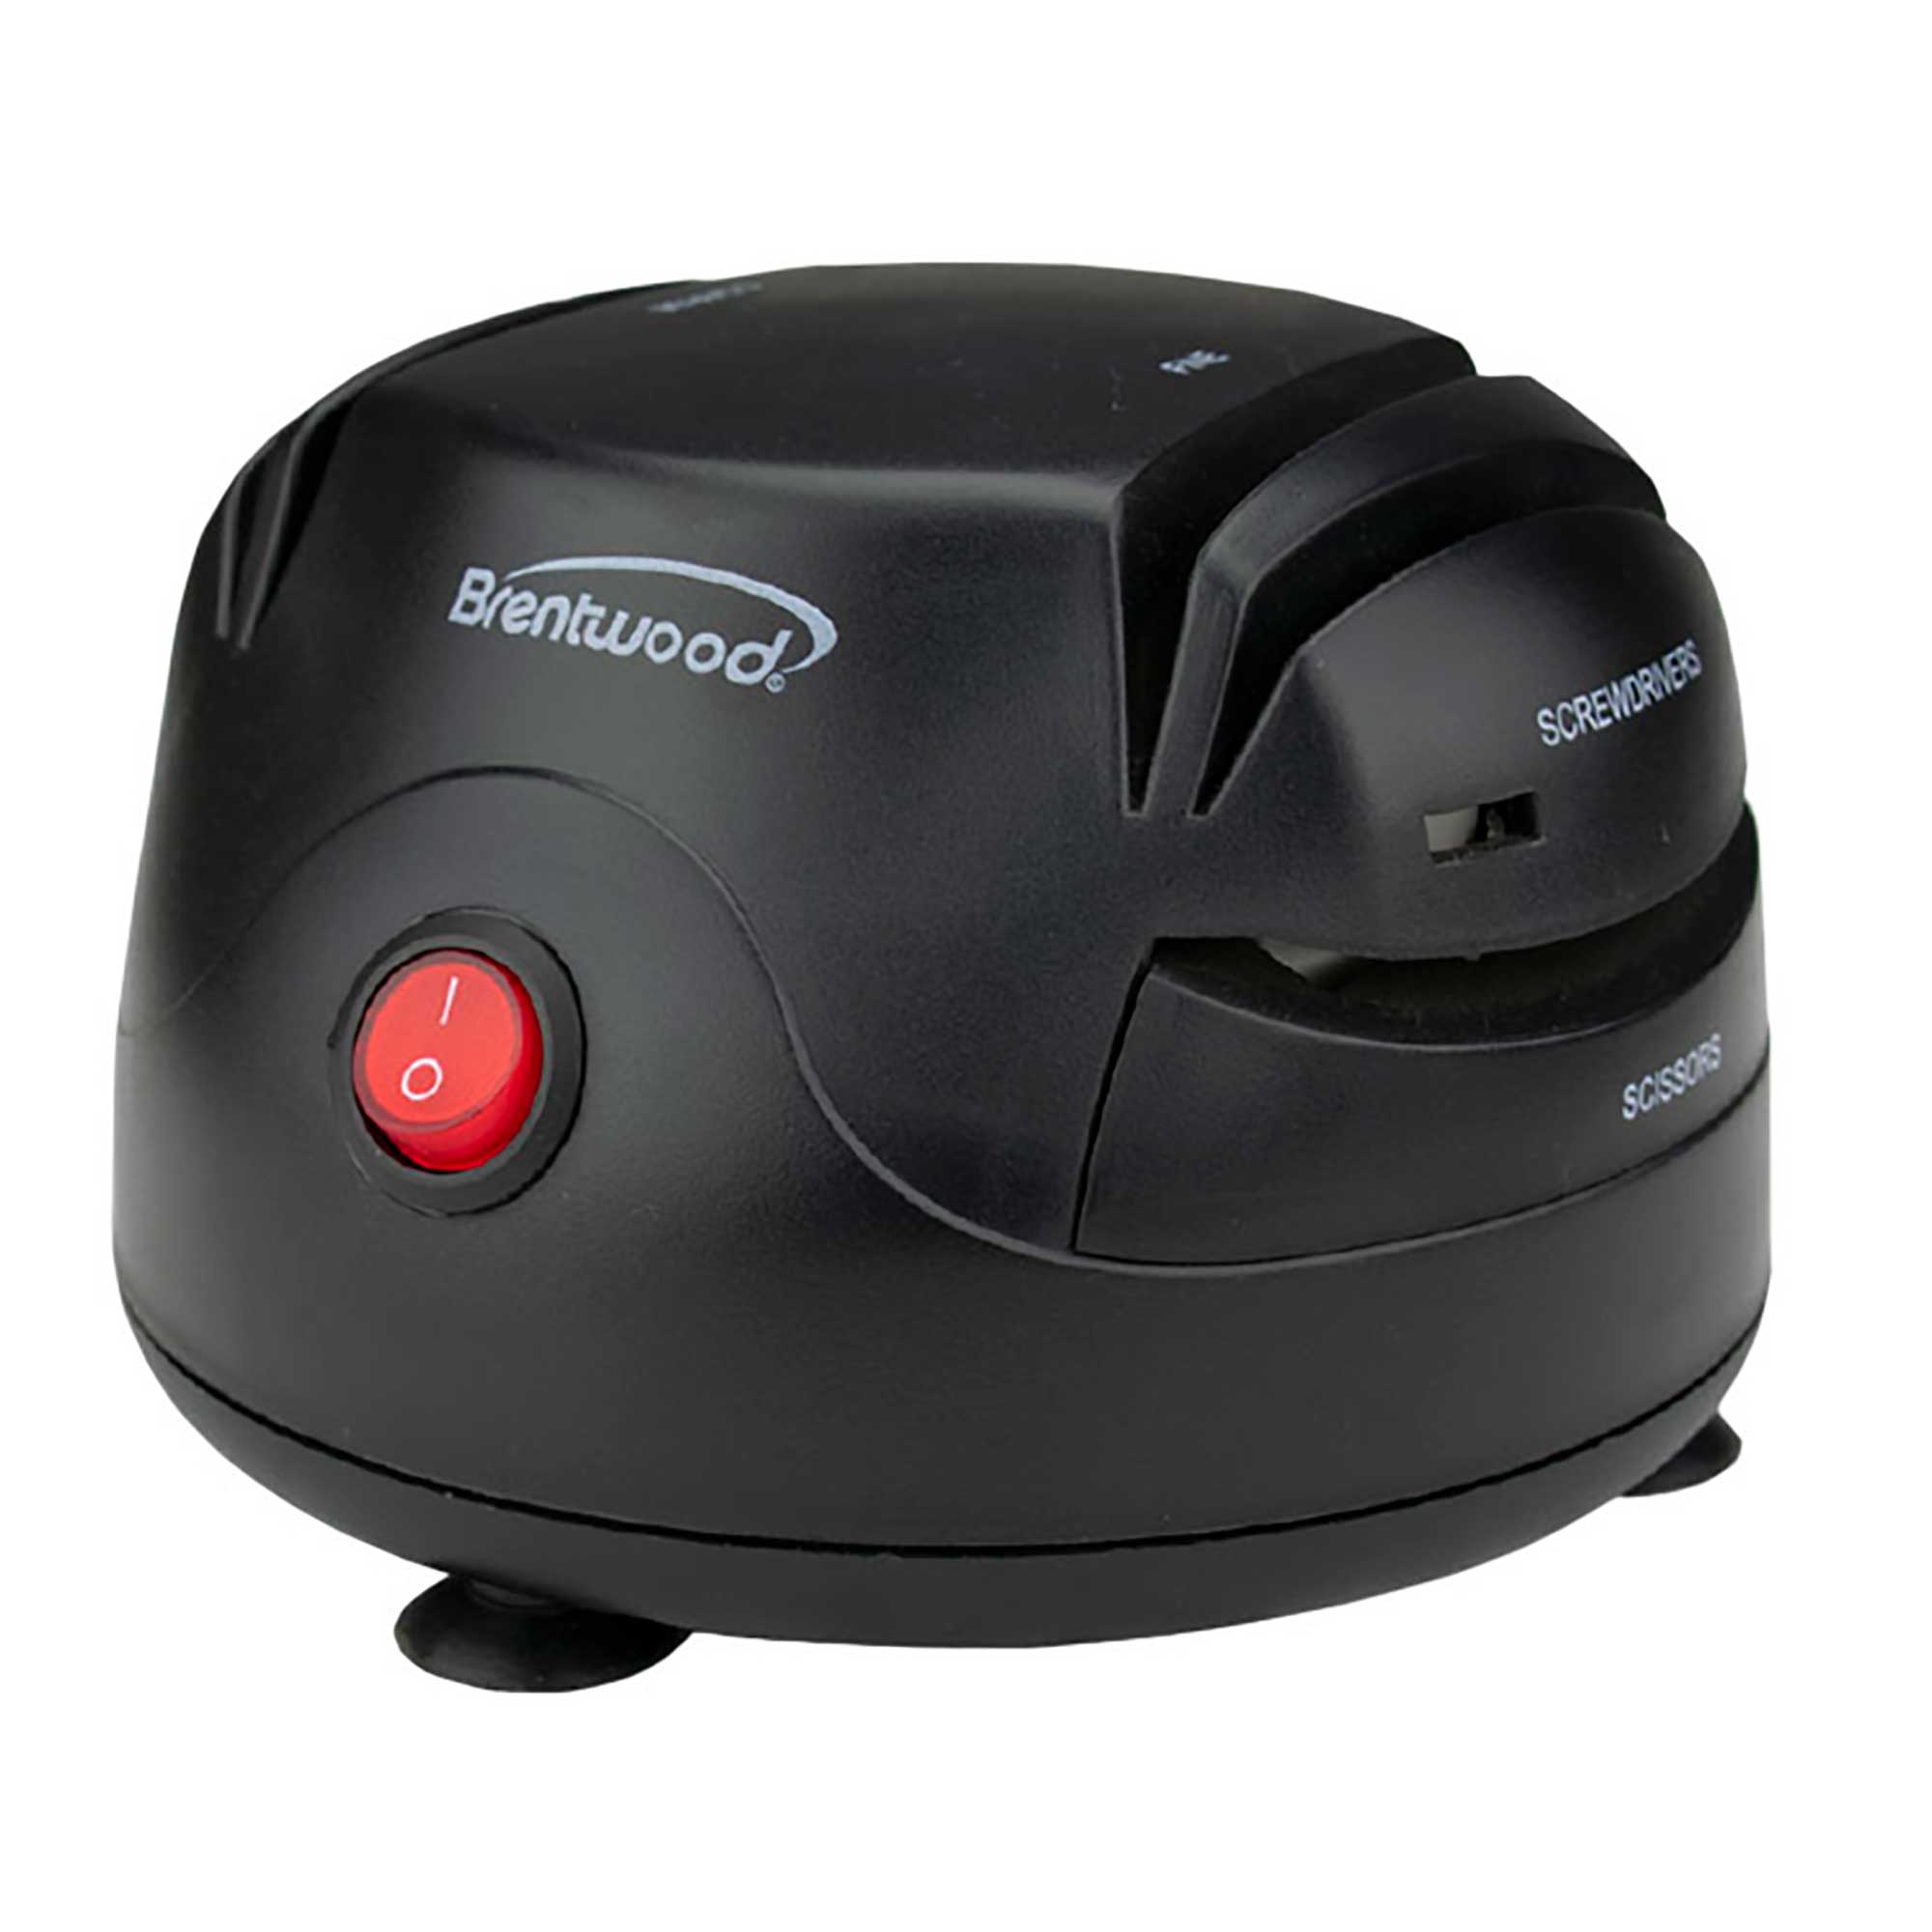 Brentwood TS-1002 Knife and Tool Sharpener, Black